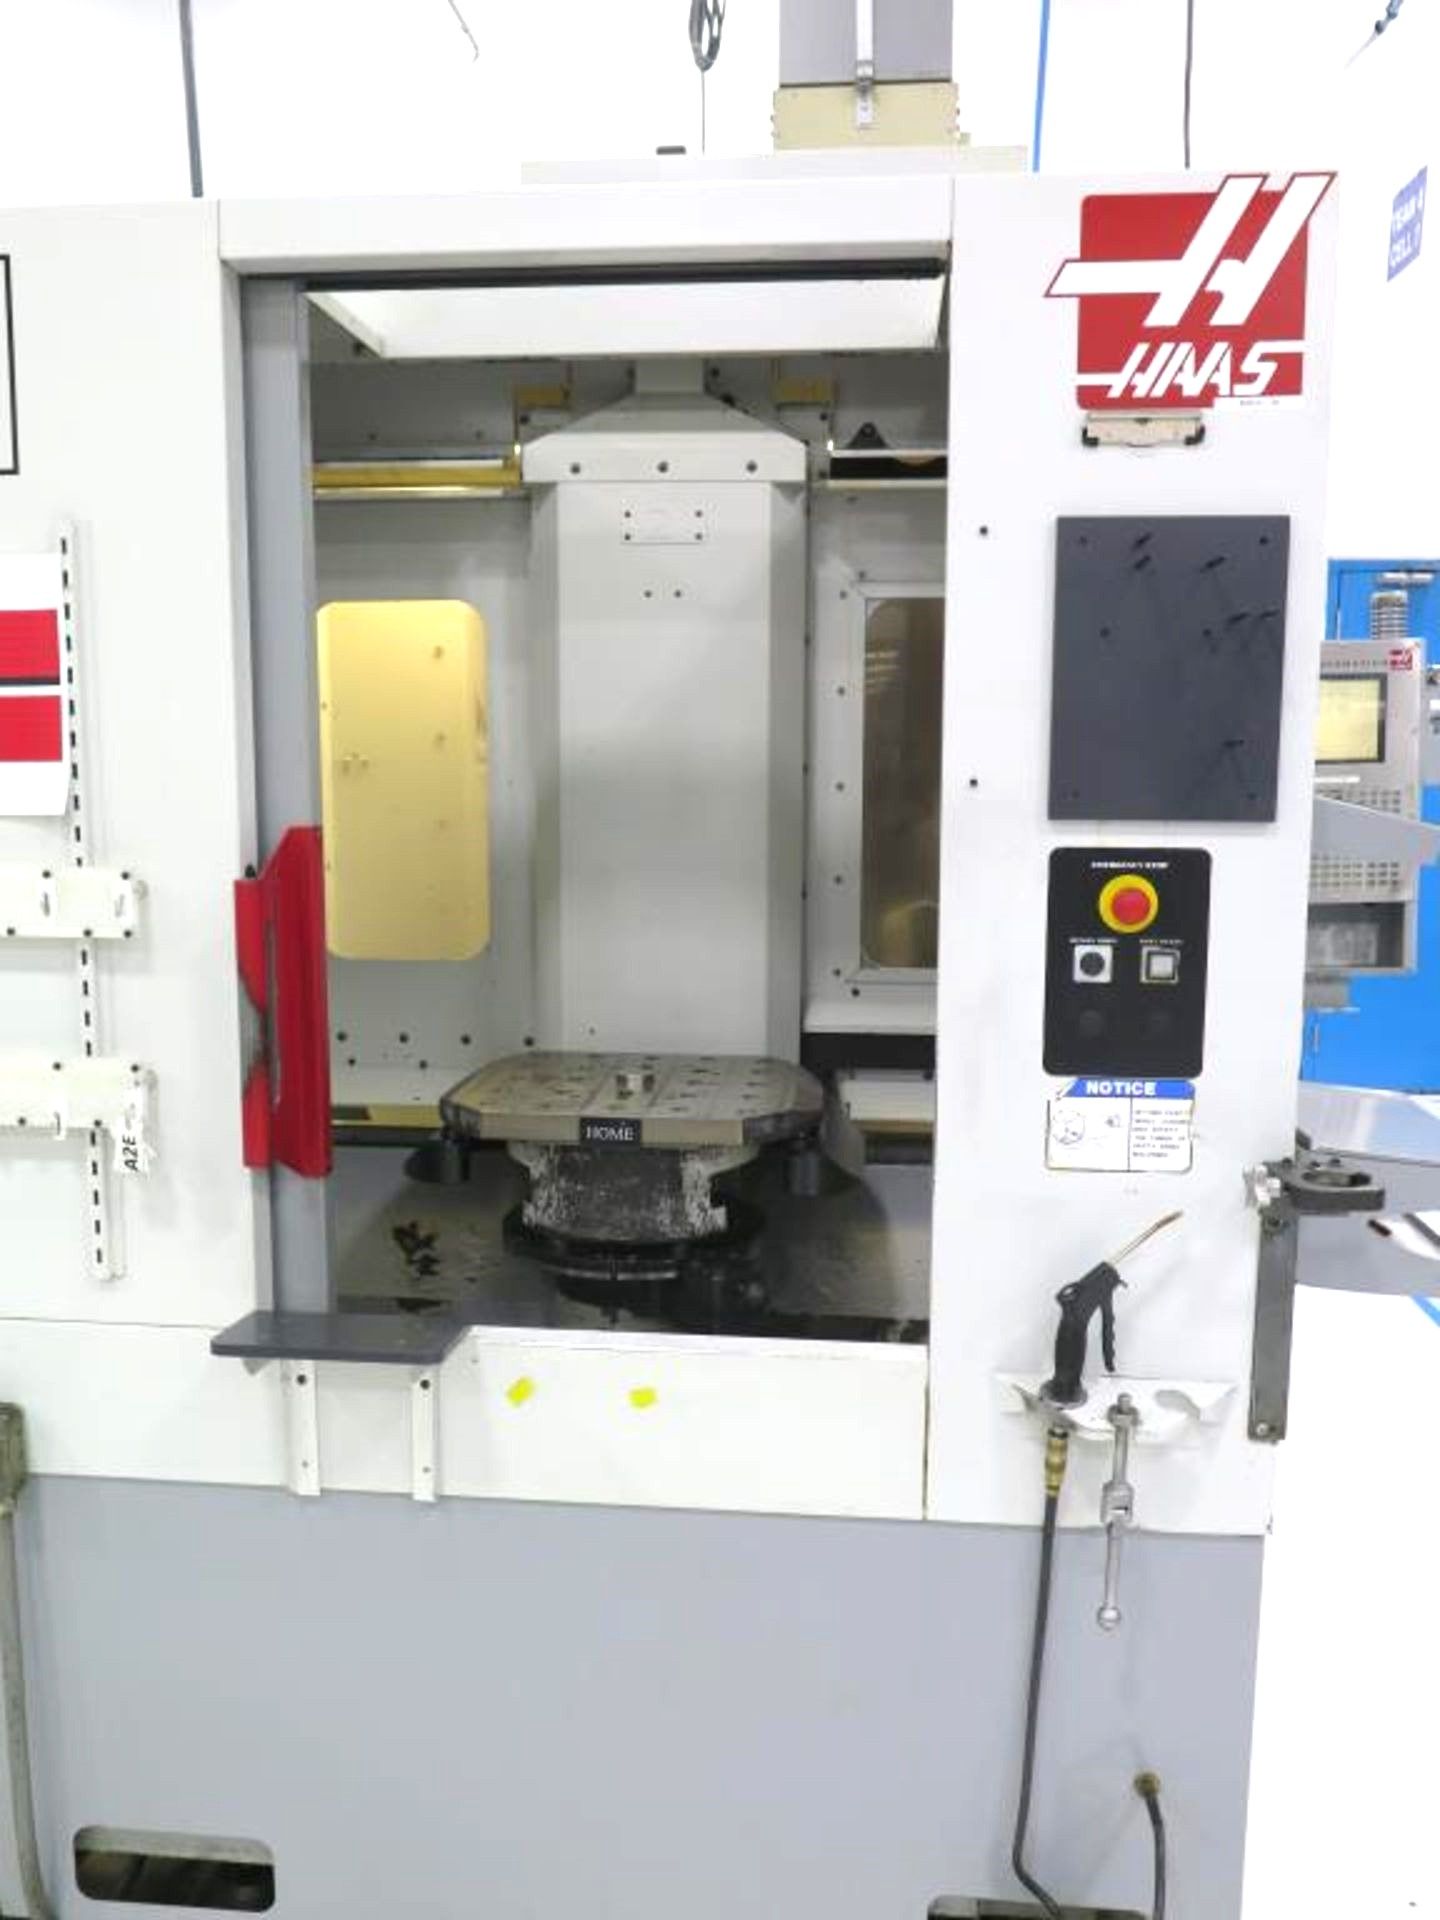 HAAS EC-400 4-AXIS PRECISION HORIZONTAL MACHINING CENTER W/16" PALLETS - Image 5 of 14